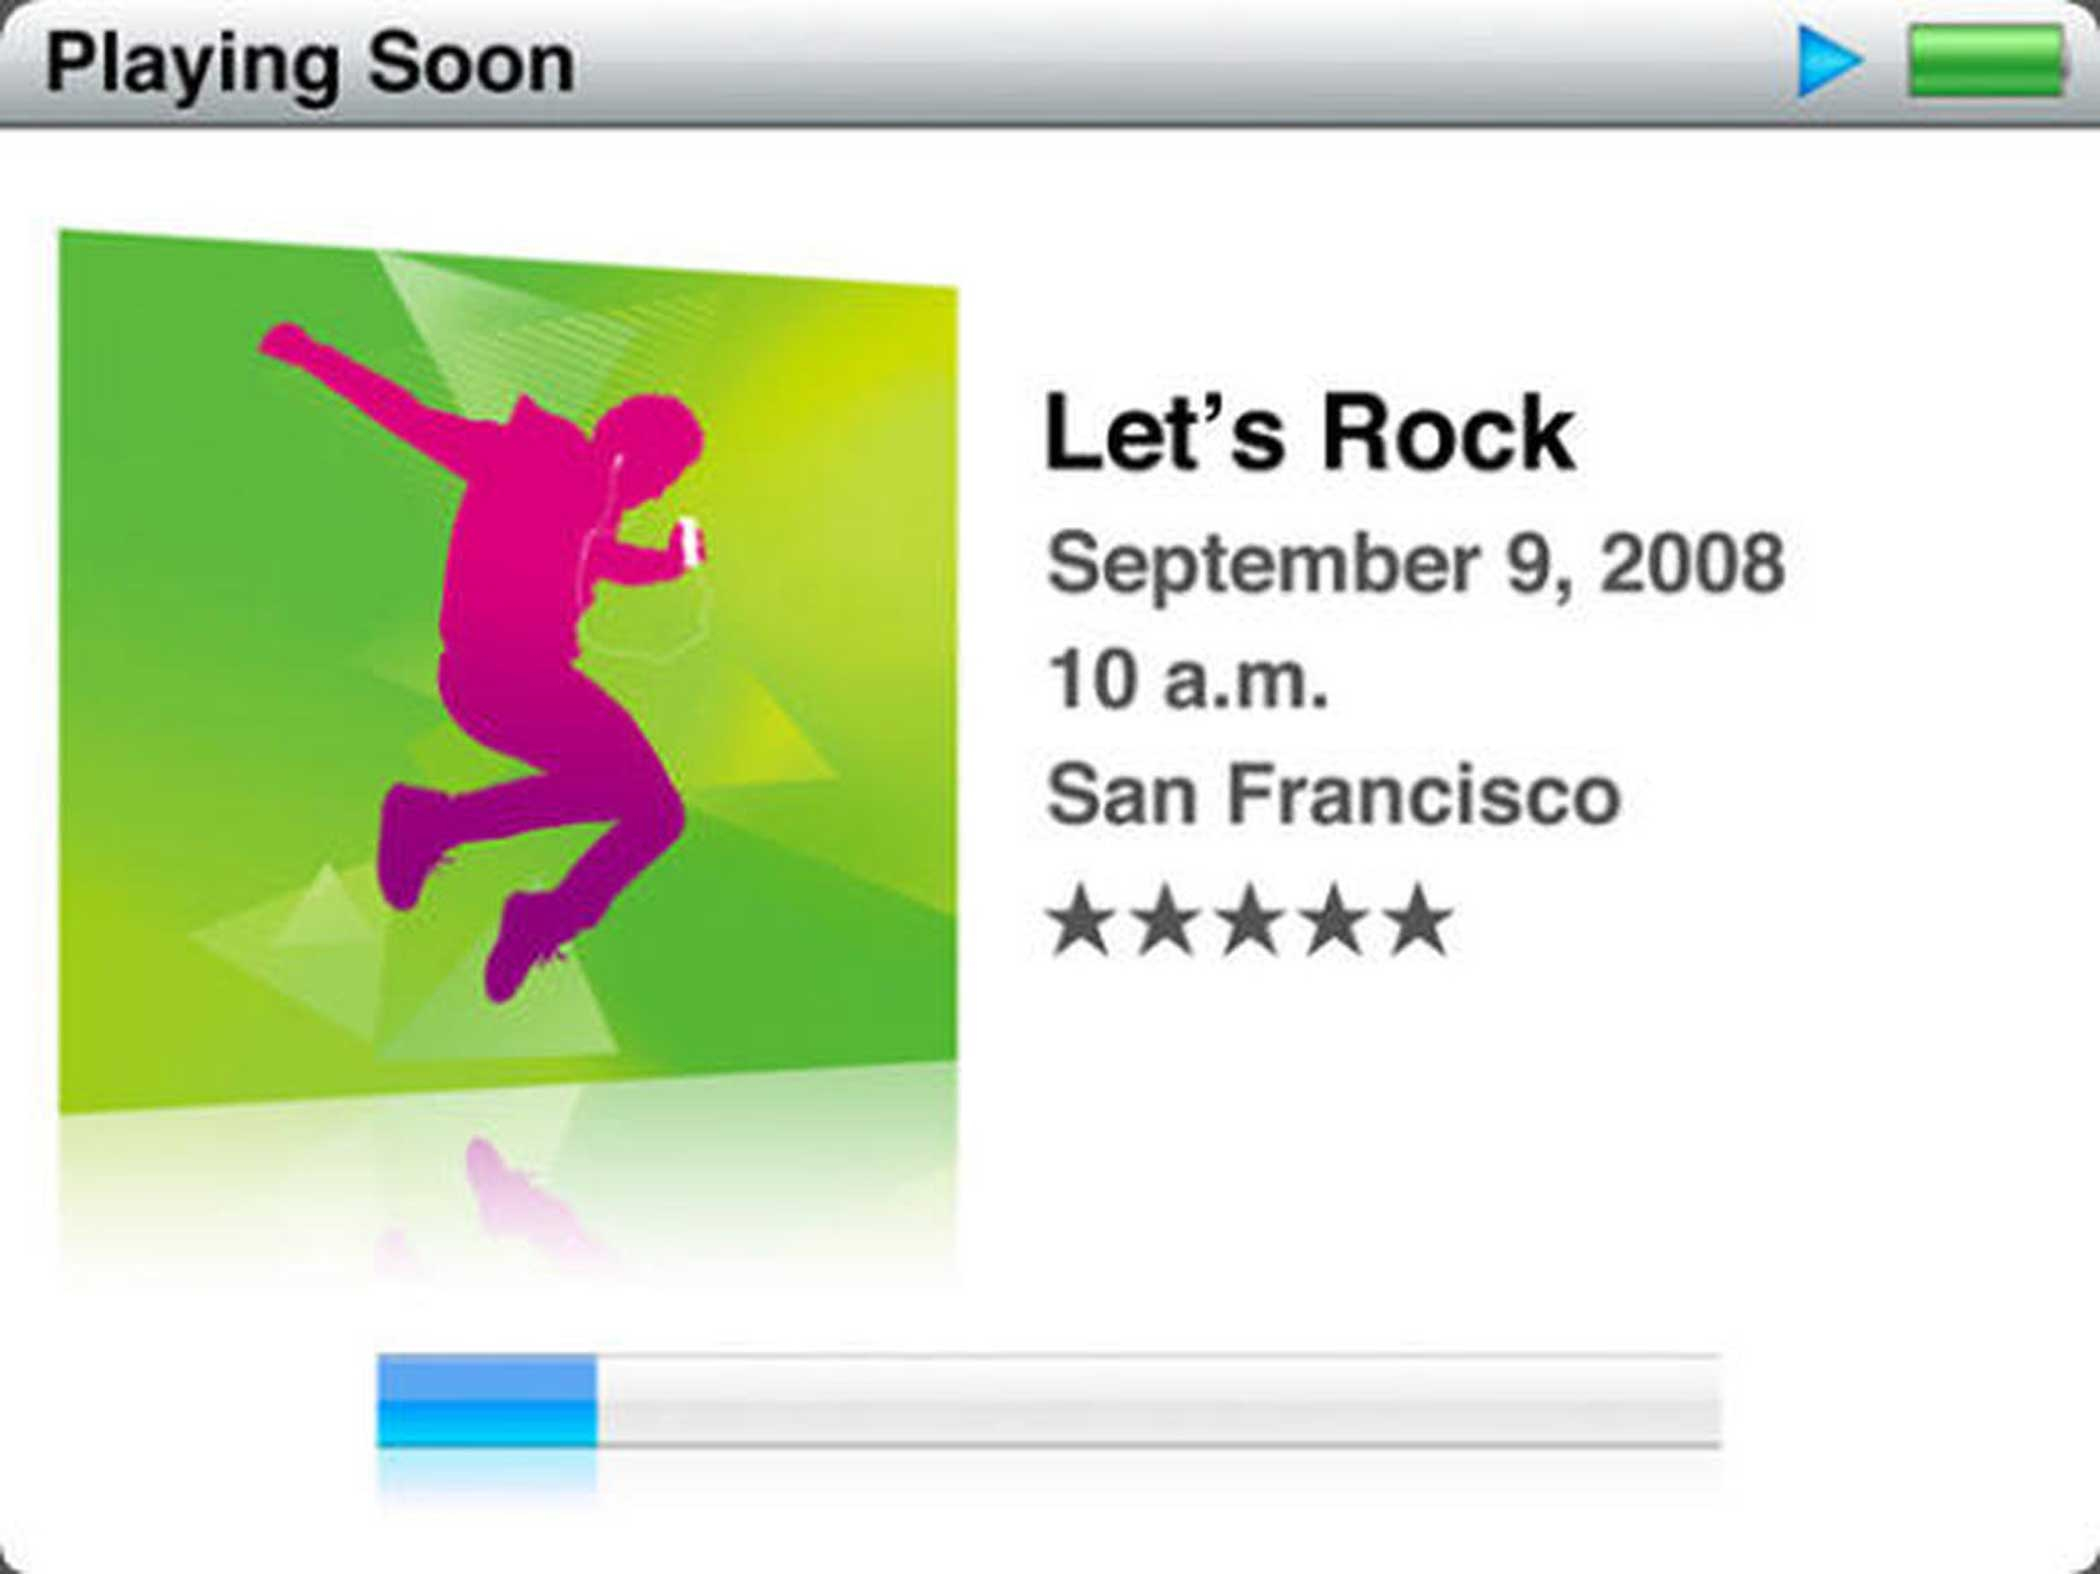 2nd Generation iPod Touch, September 2008, Cupertino